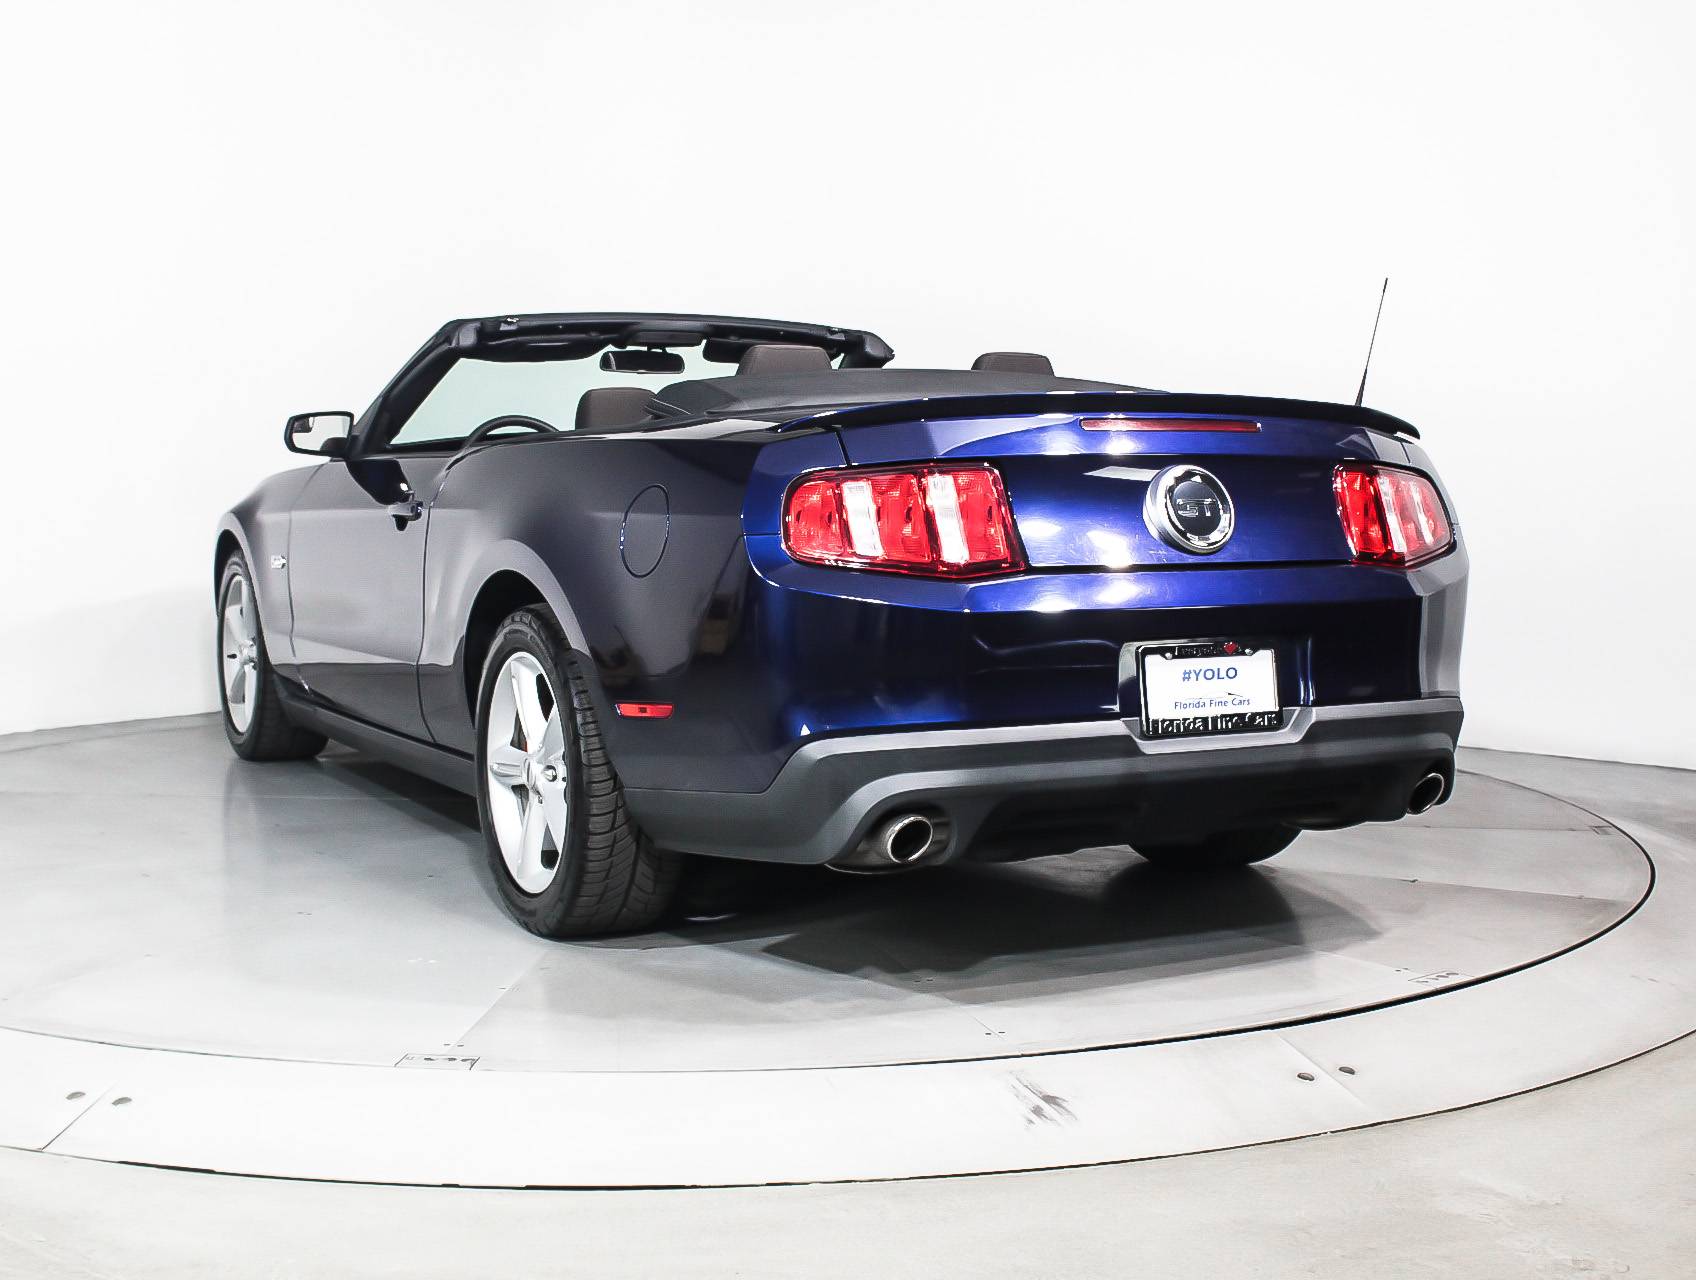 Florida Fine Cars - Used FORD MUSTANG 2011 MIAMI GT